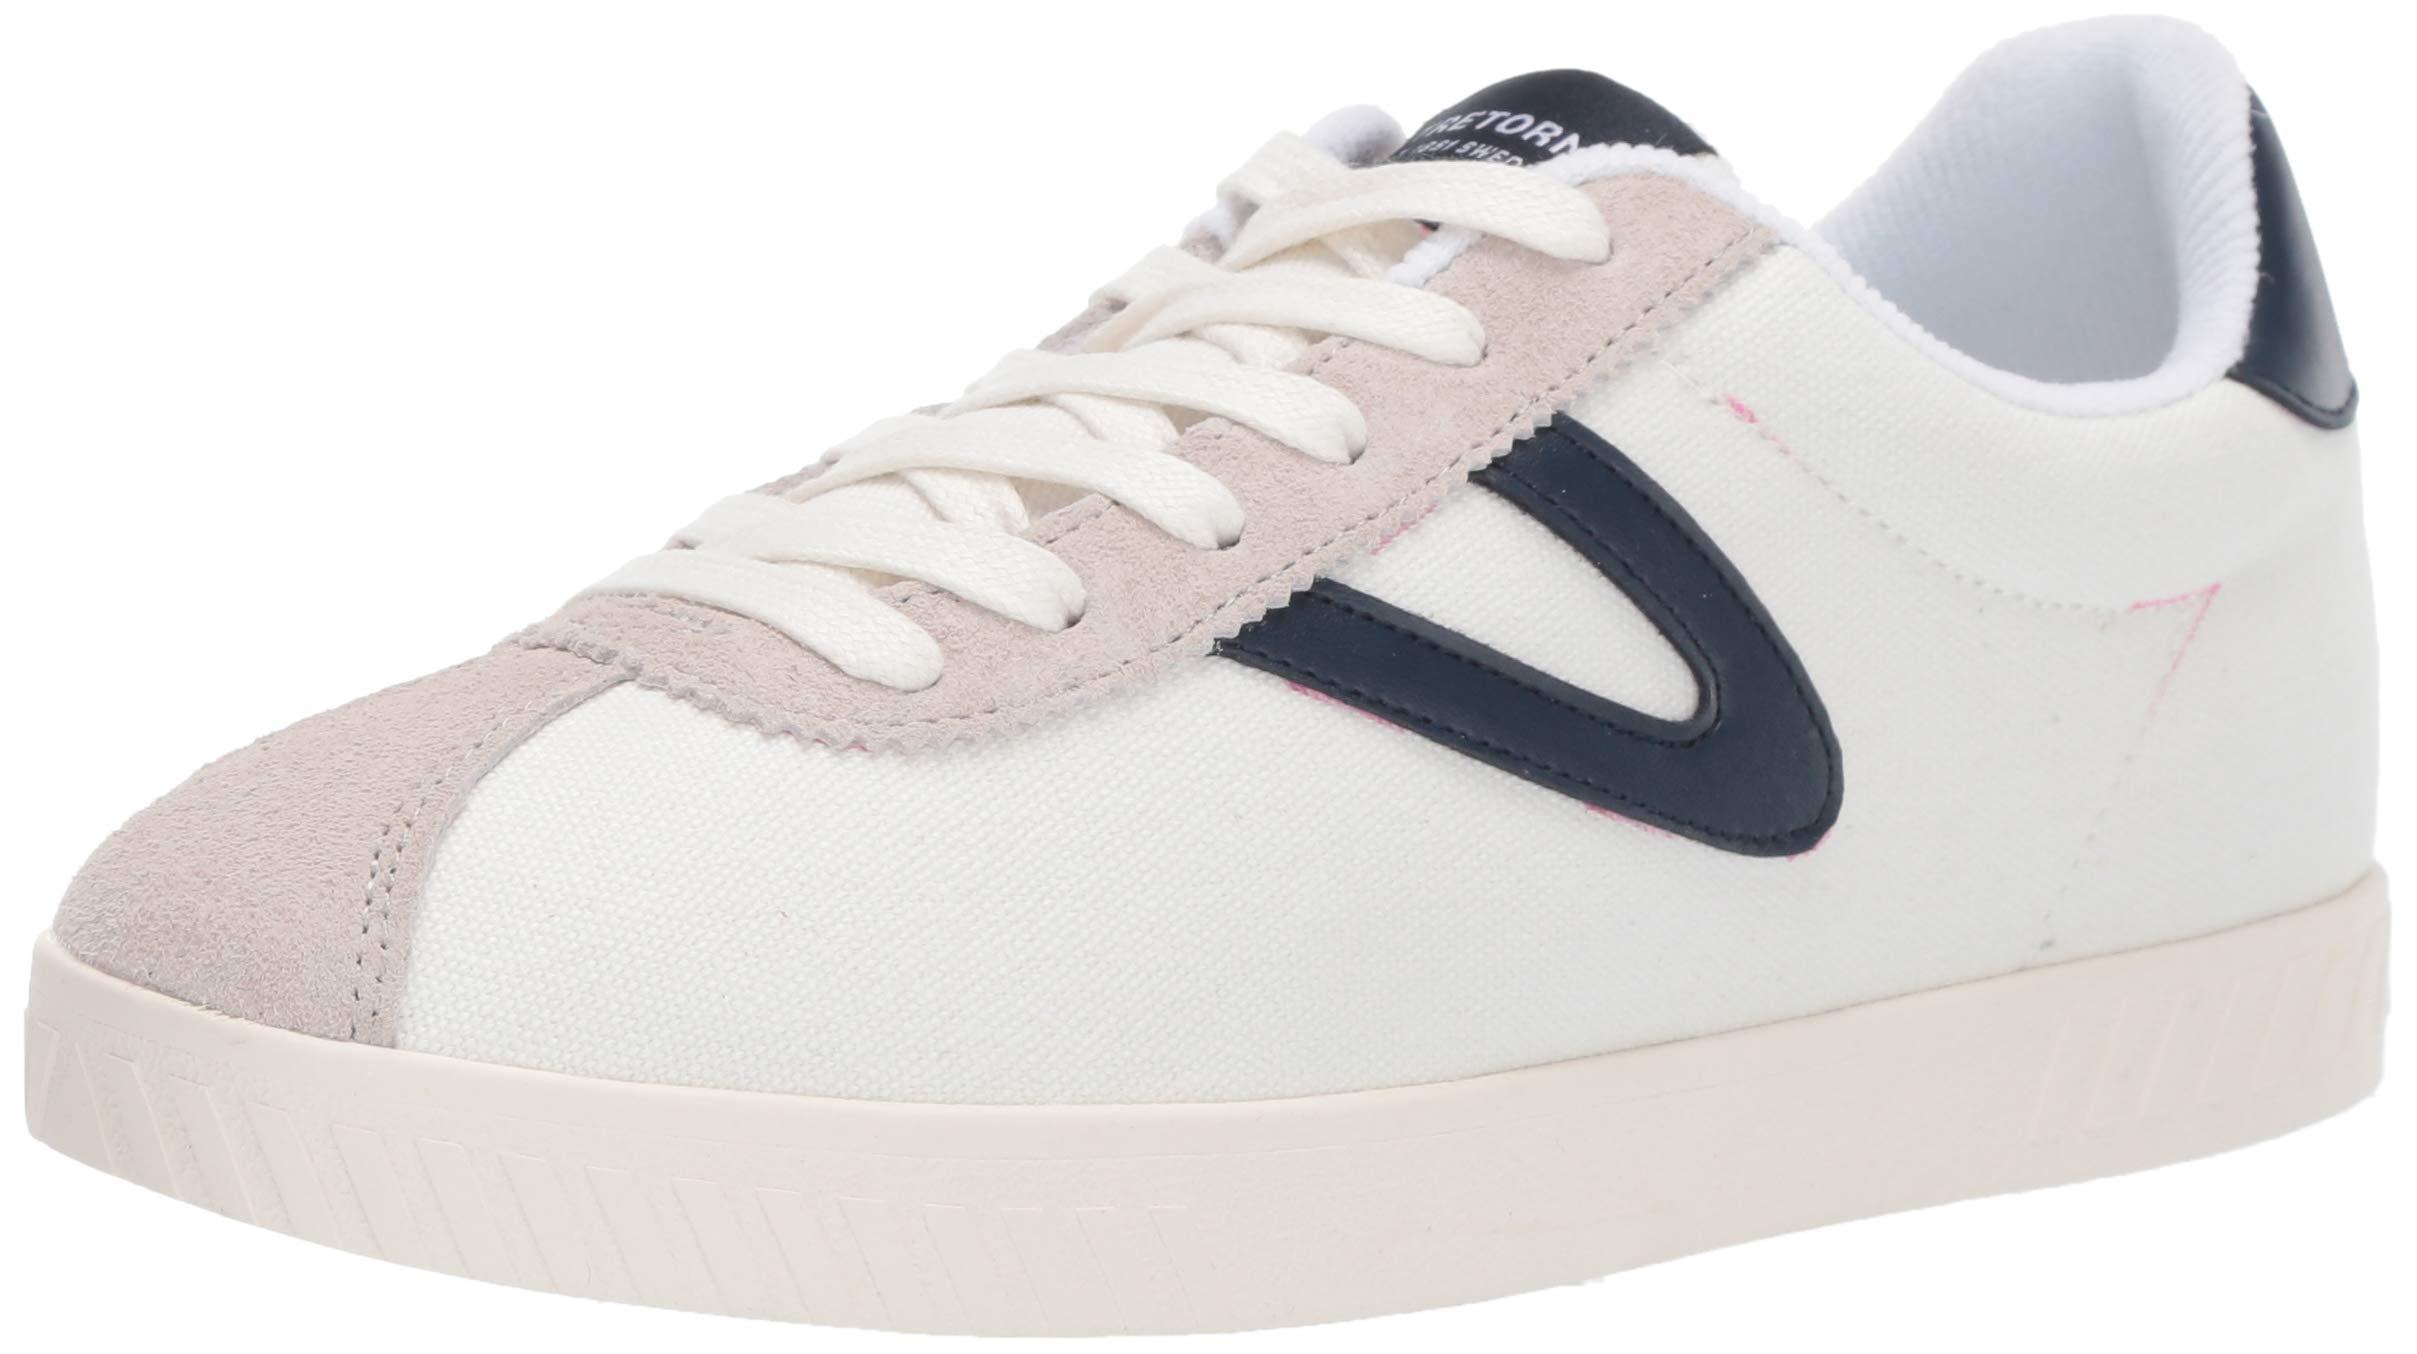 Tretorn Suede Callie Sneaker in Ivory (White) - Save 40% - Lyst